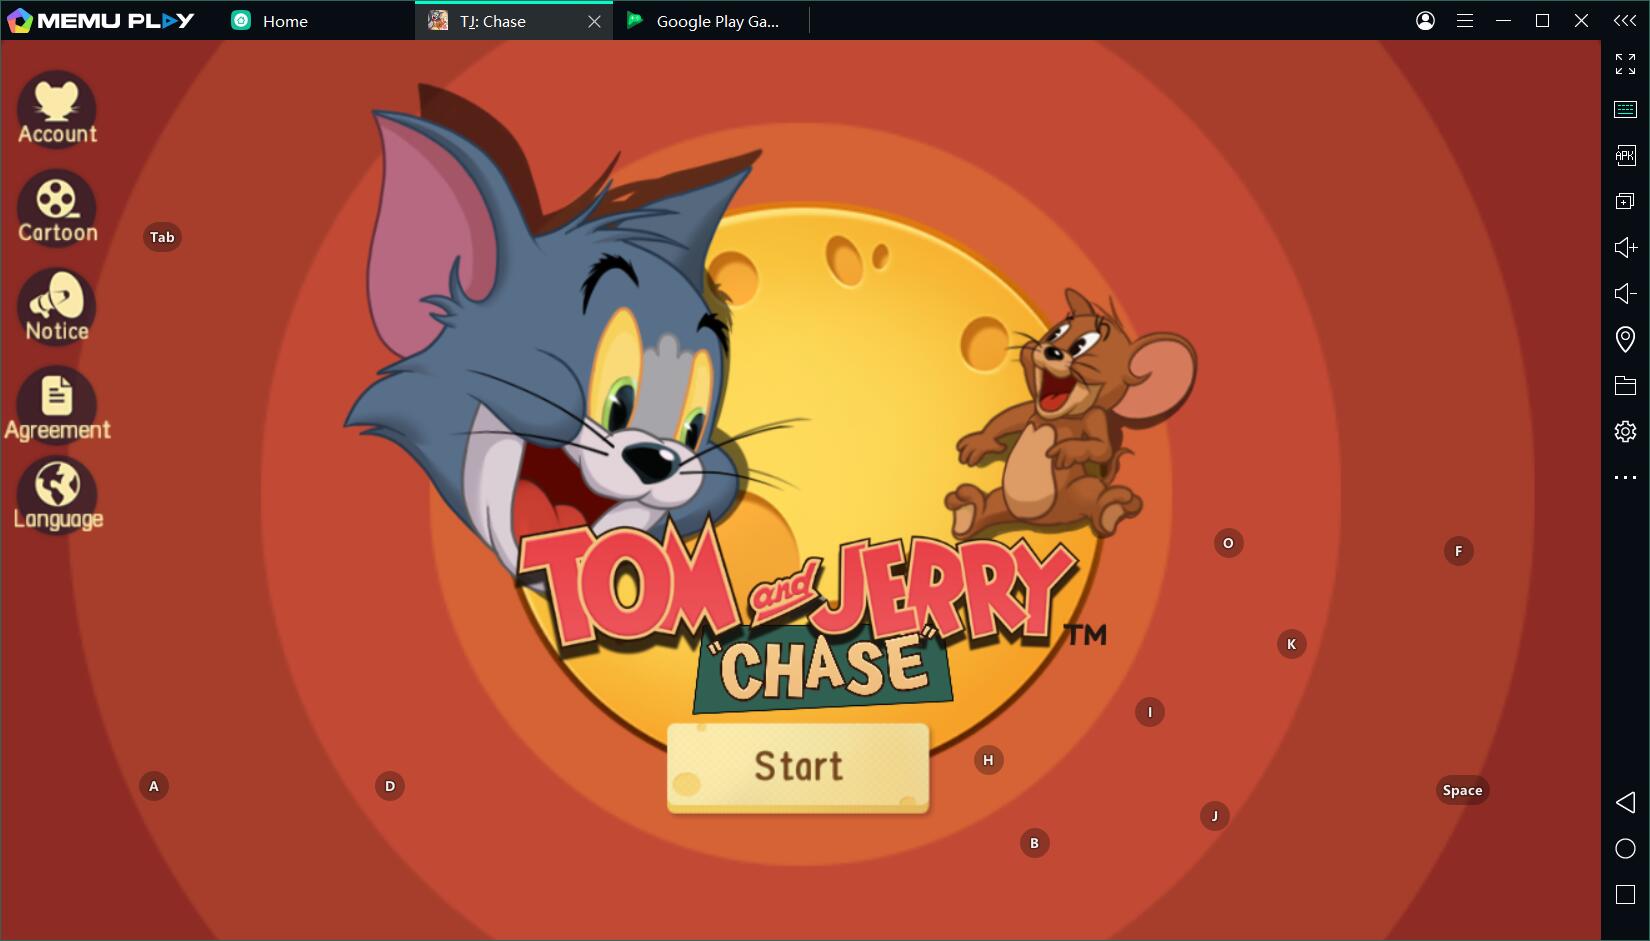 Tom and Jerry Chase Asia